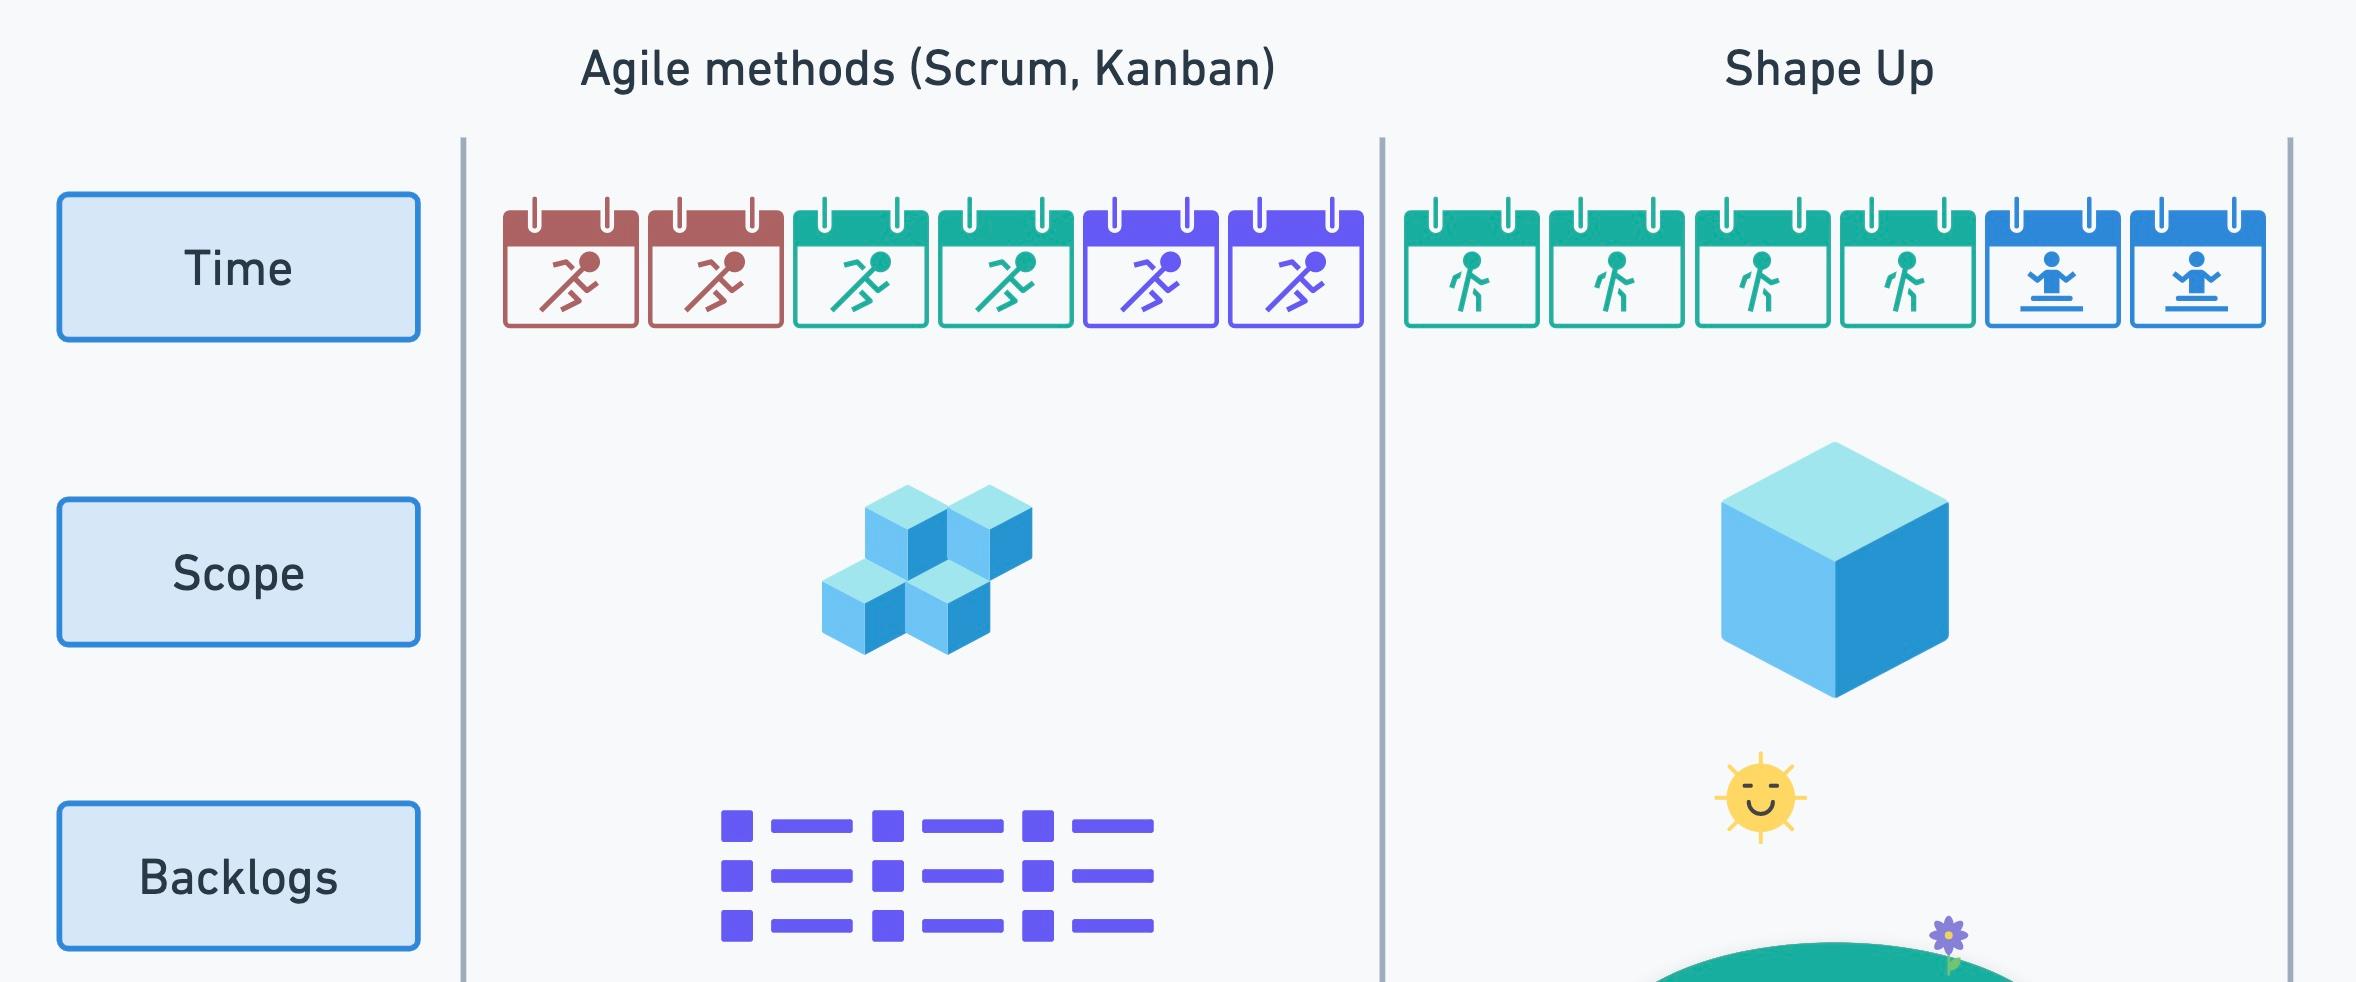 Comparison of the differences between Agile methods, like Kanban and Scrum, and Shape Up. The differences shown are Time, Scope and Backlogs